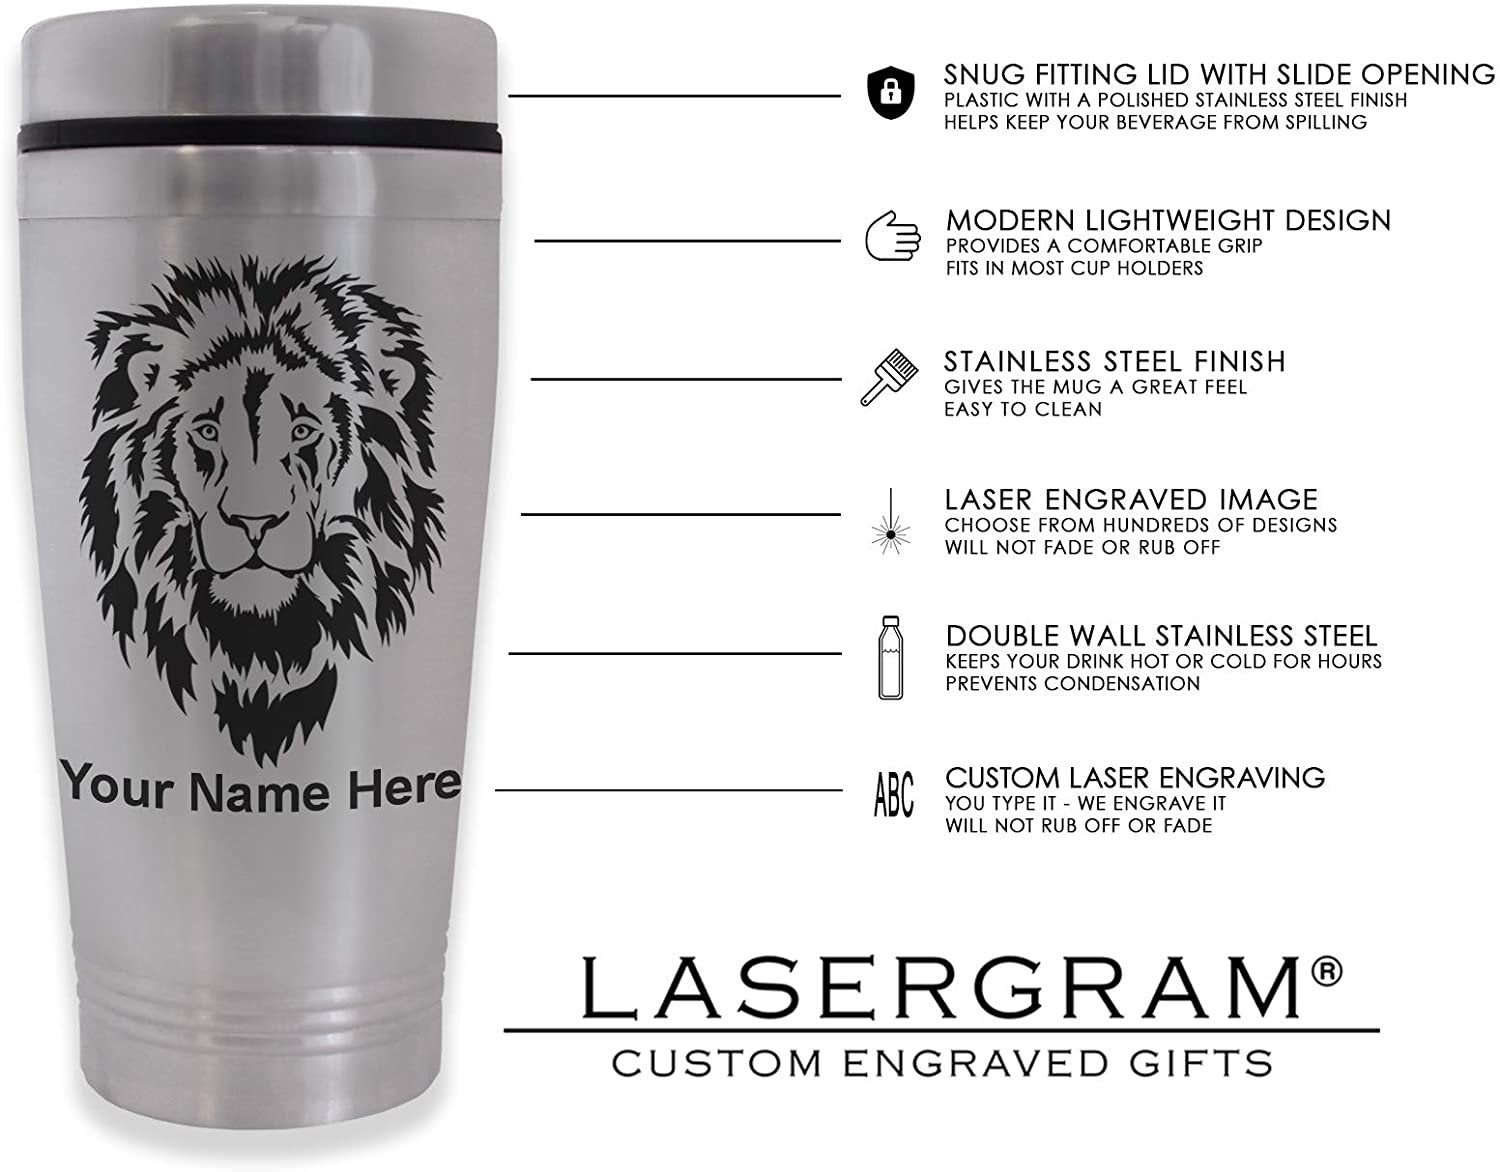 Commuter Travel Mug, Accounting, Personalized Engraving Included - LaserGram Custom Engraved Gifts